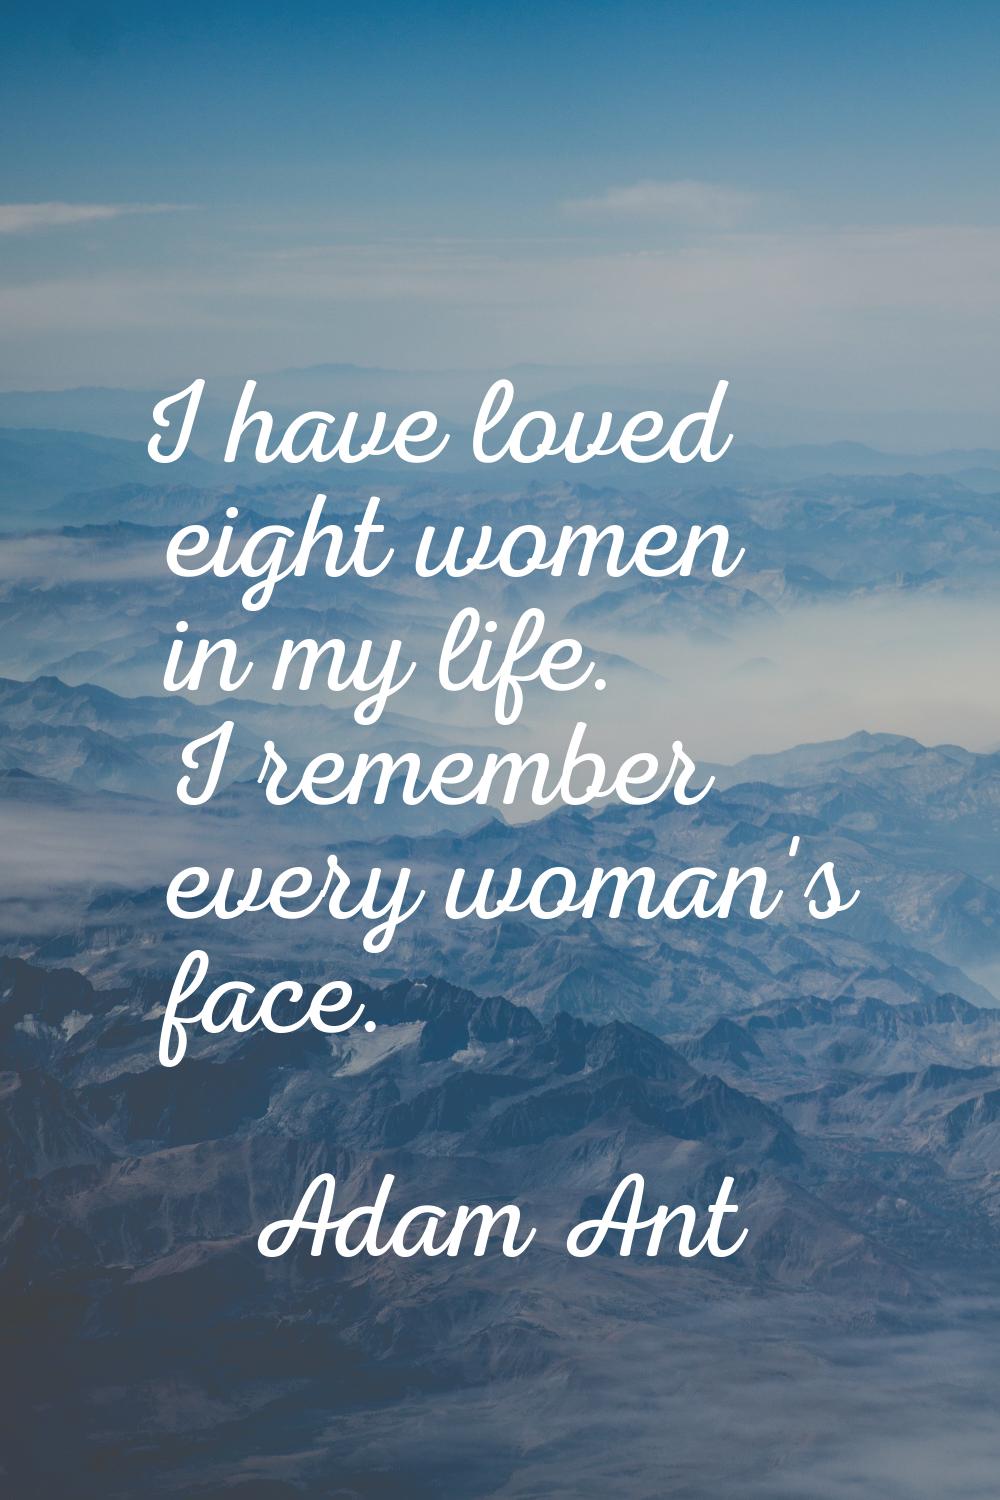 I have loved eight women in my life. I remember every woman's face.